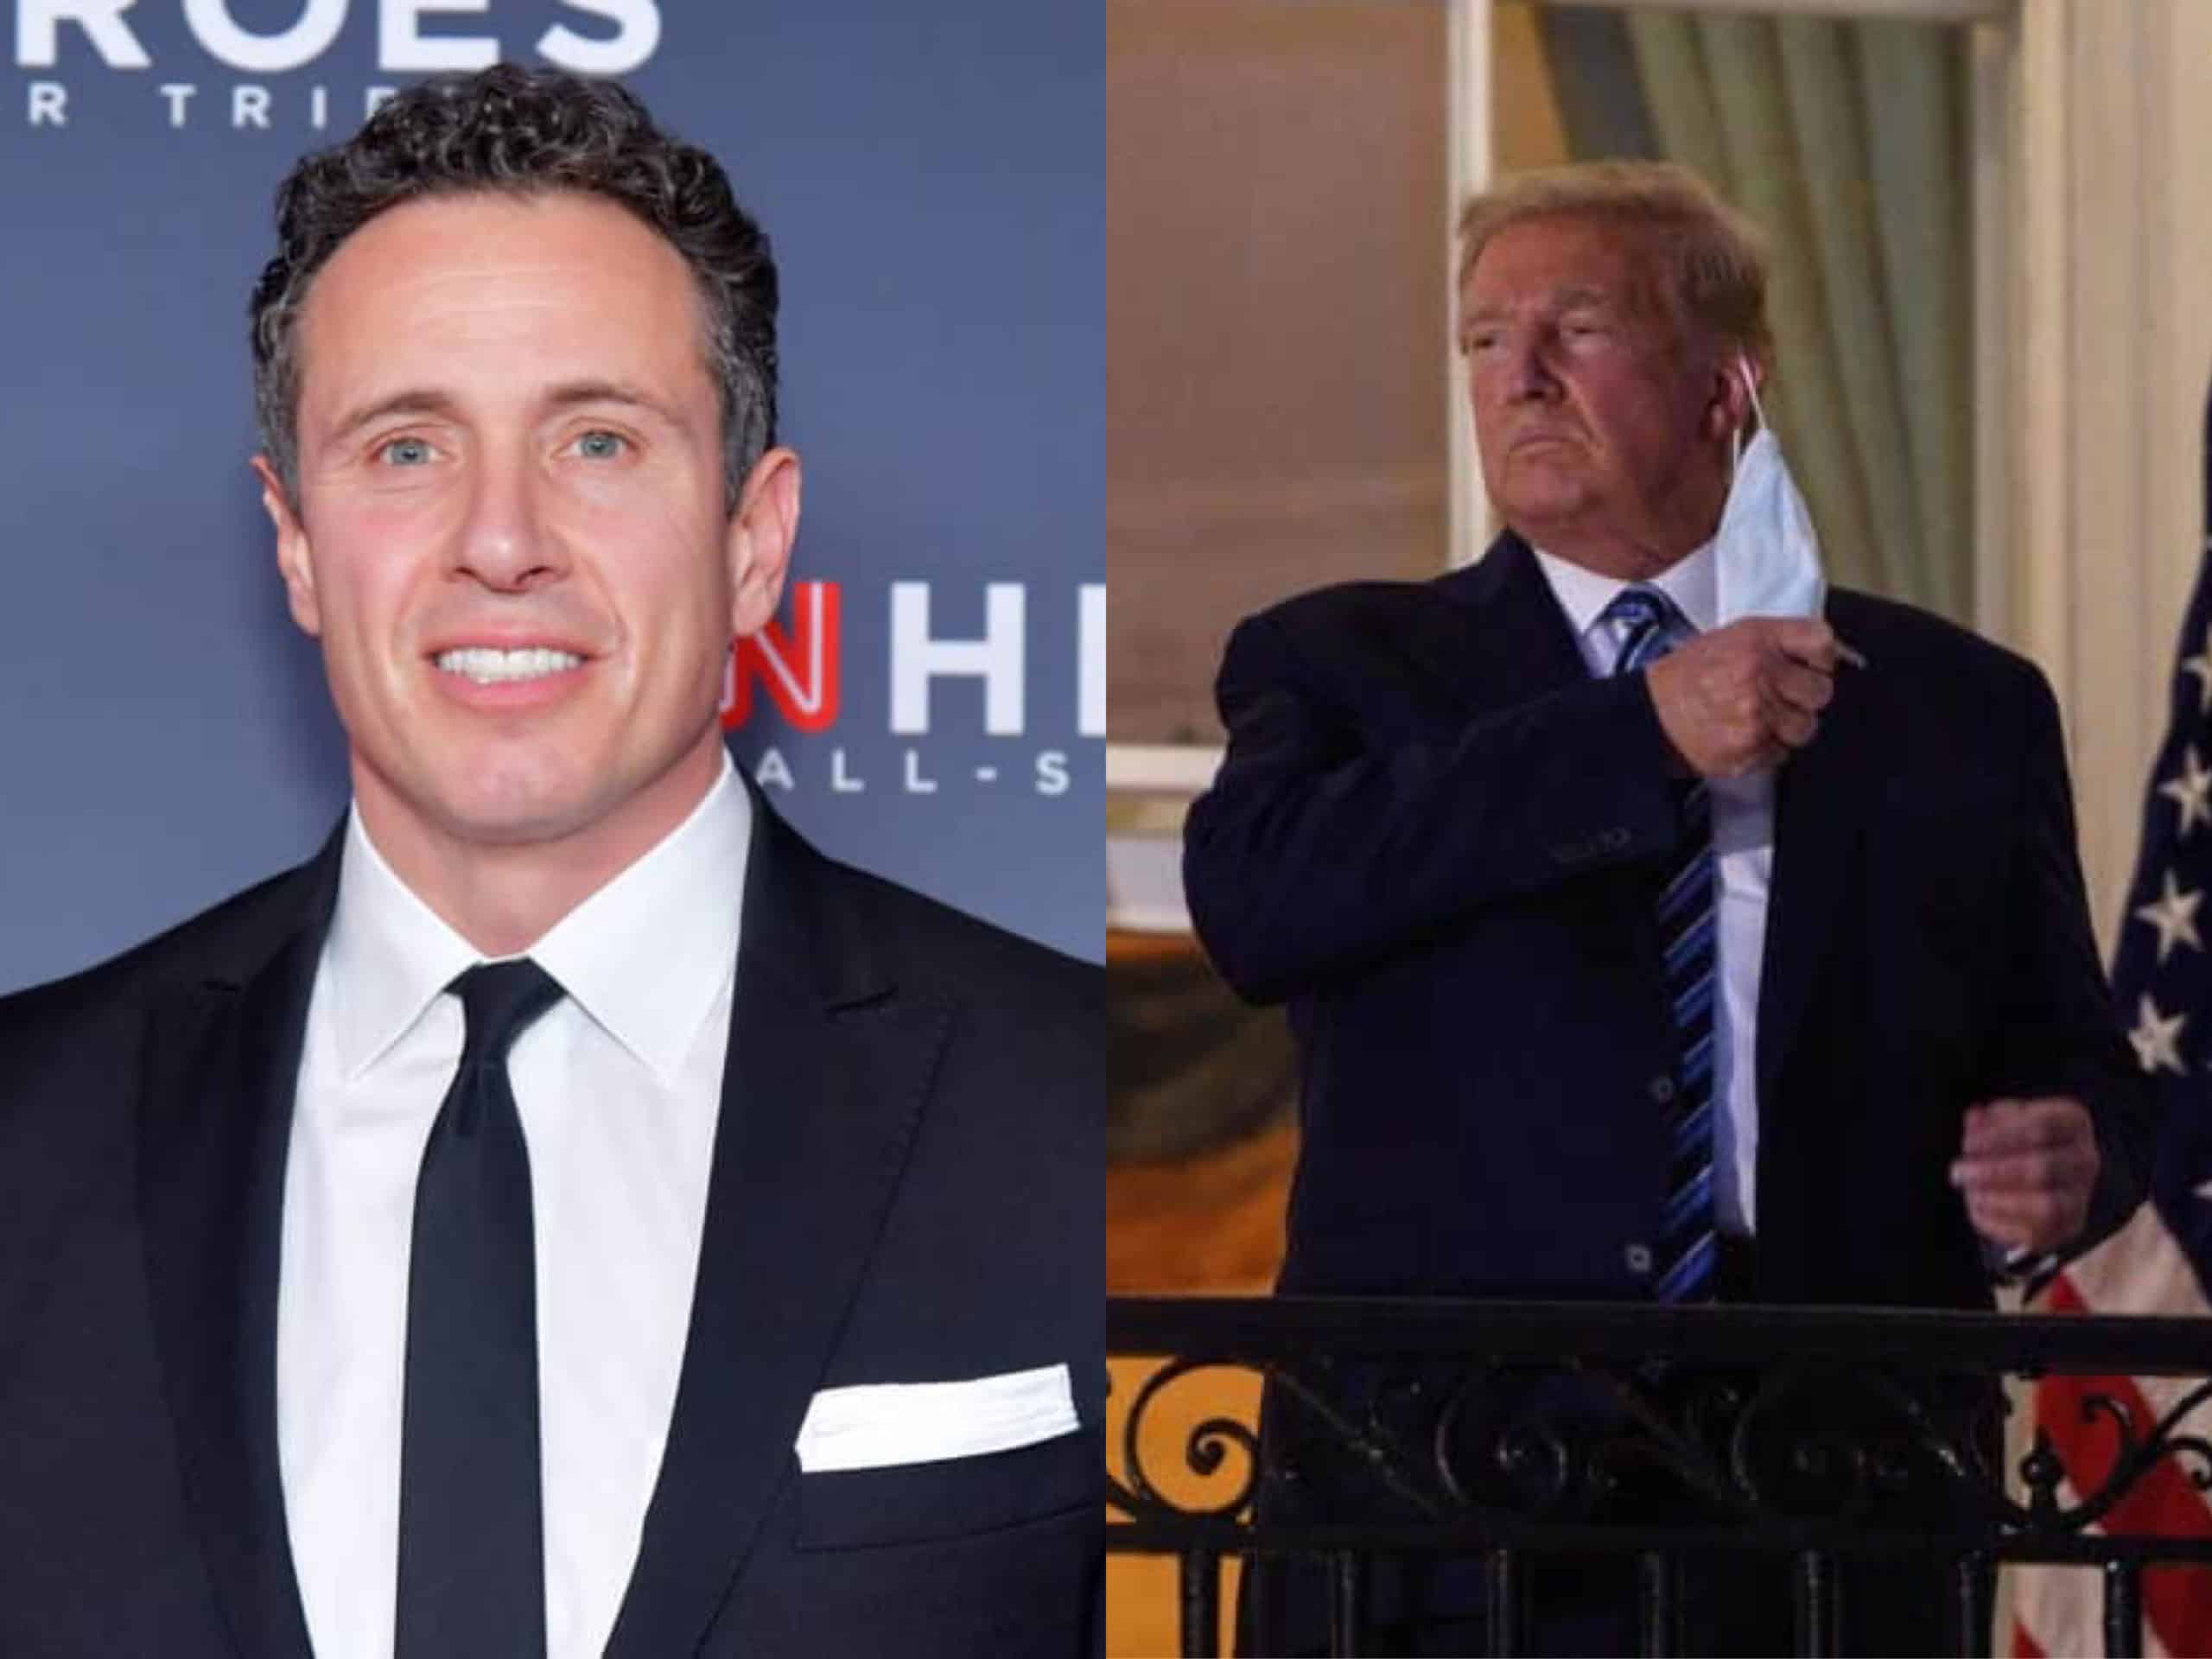 Chris Cuomo Calls Out Donald Trump After He Returns To The White House Following His COVID-19 Diagnosis